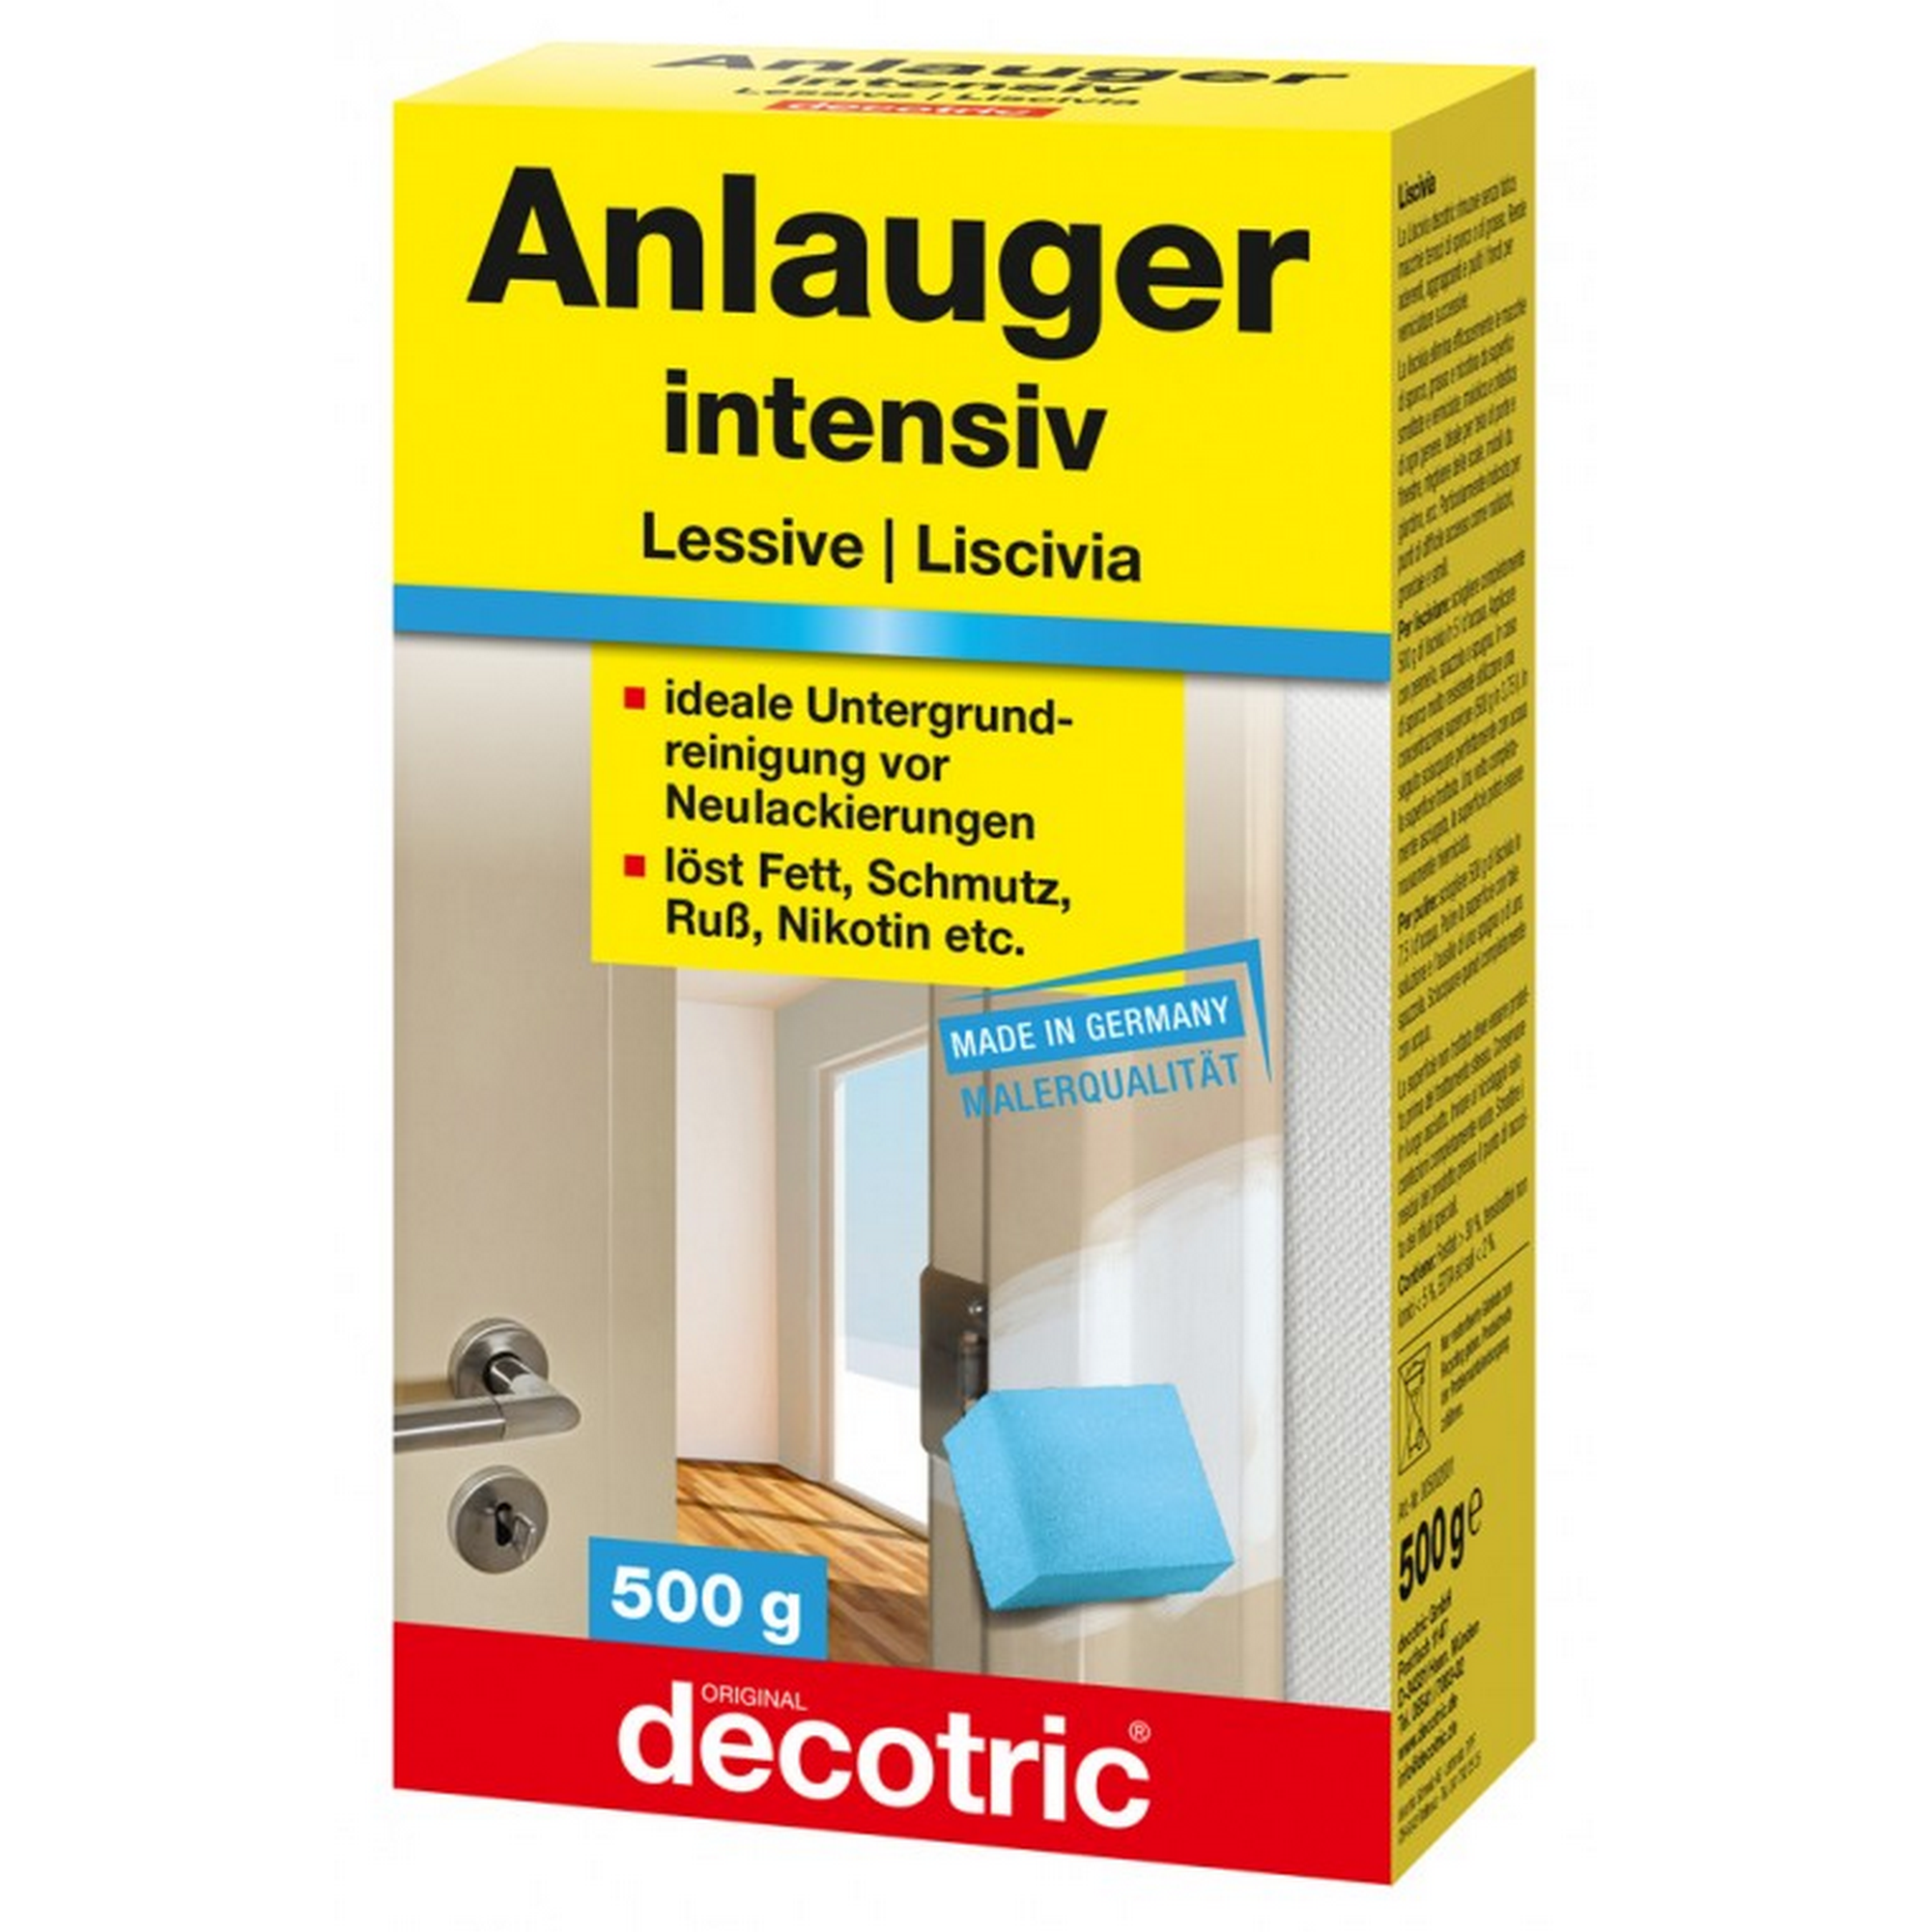 Anlauger 'intensiv' 500 g + product picture